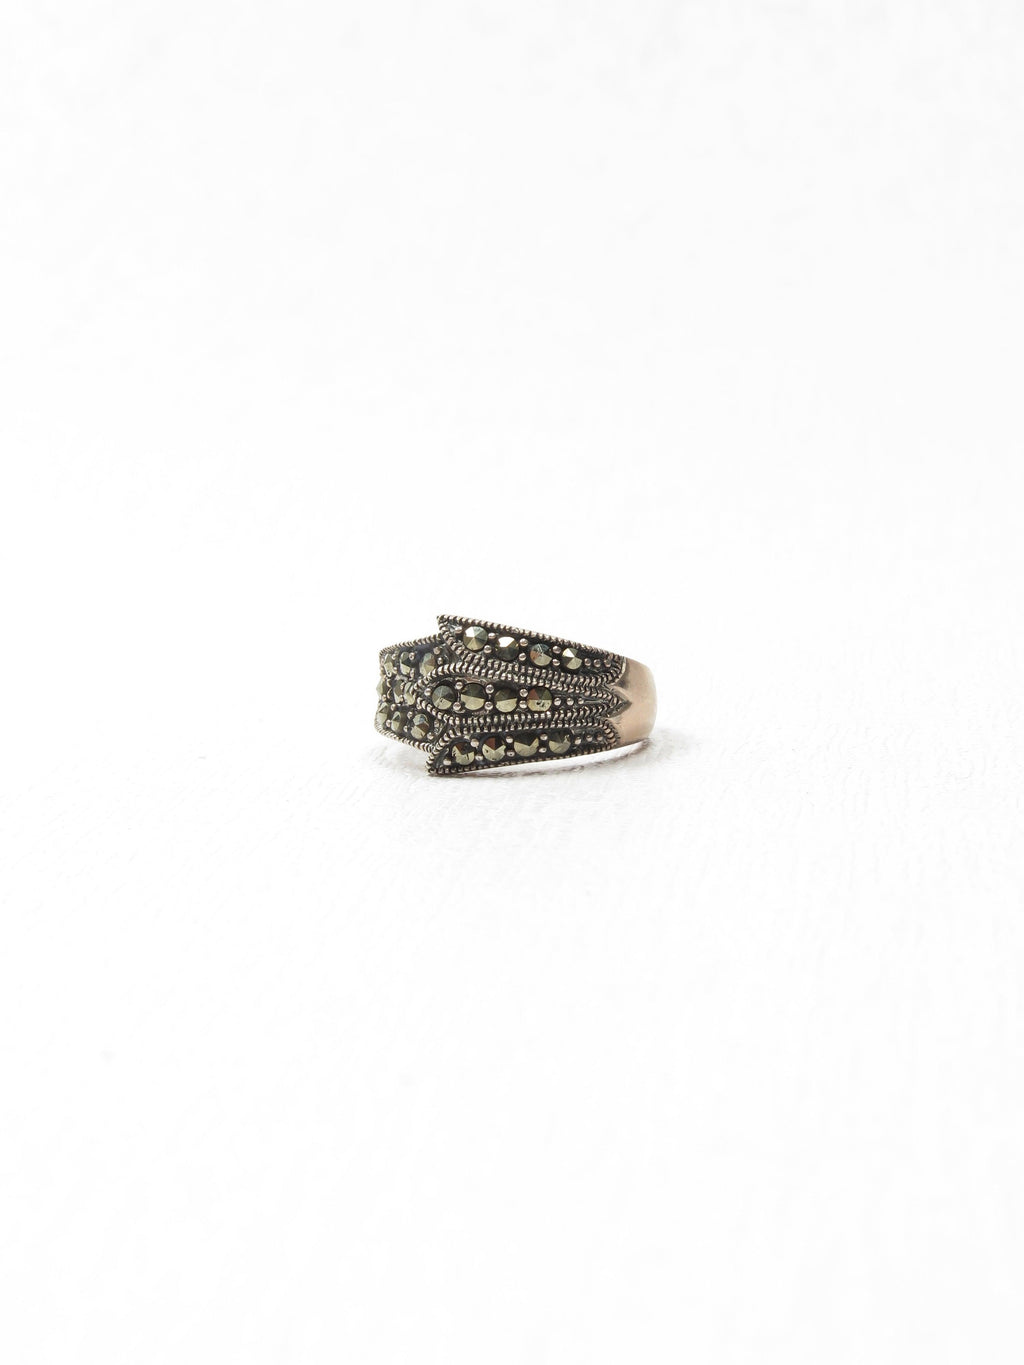 Vintage Style Marcasite Art Deco Ring - The Harlequin